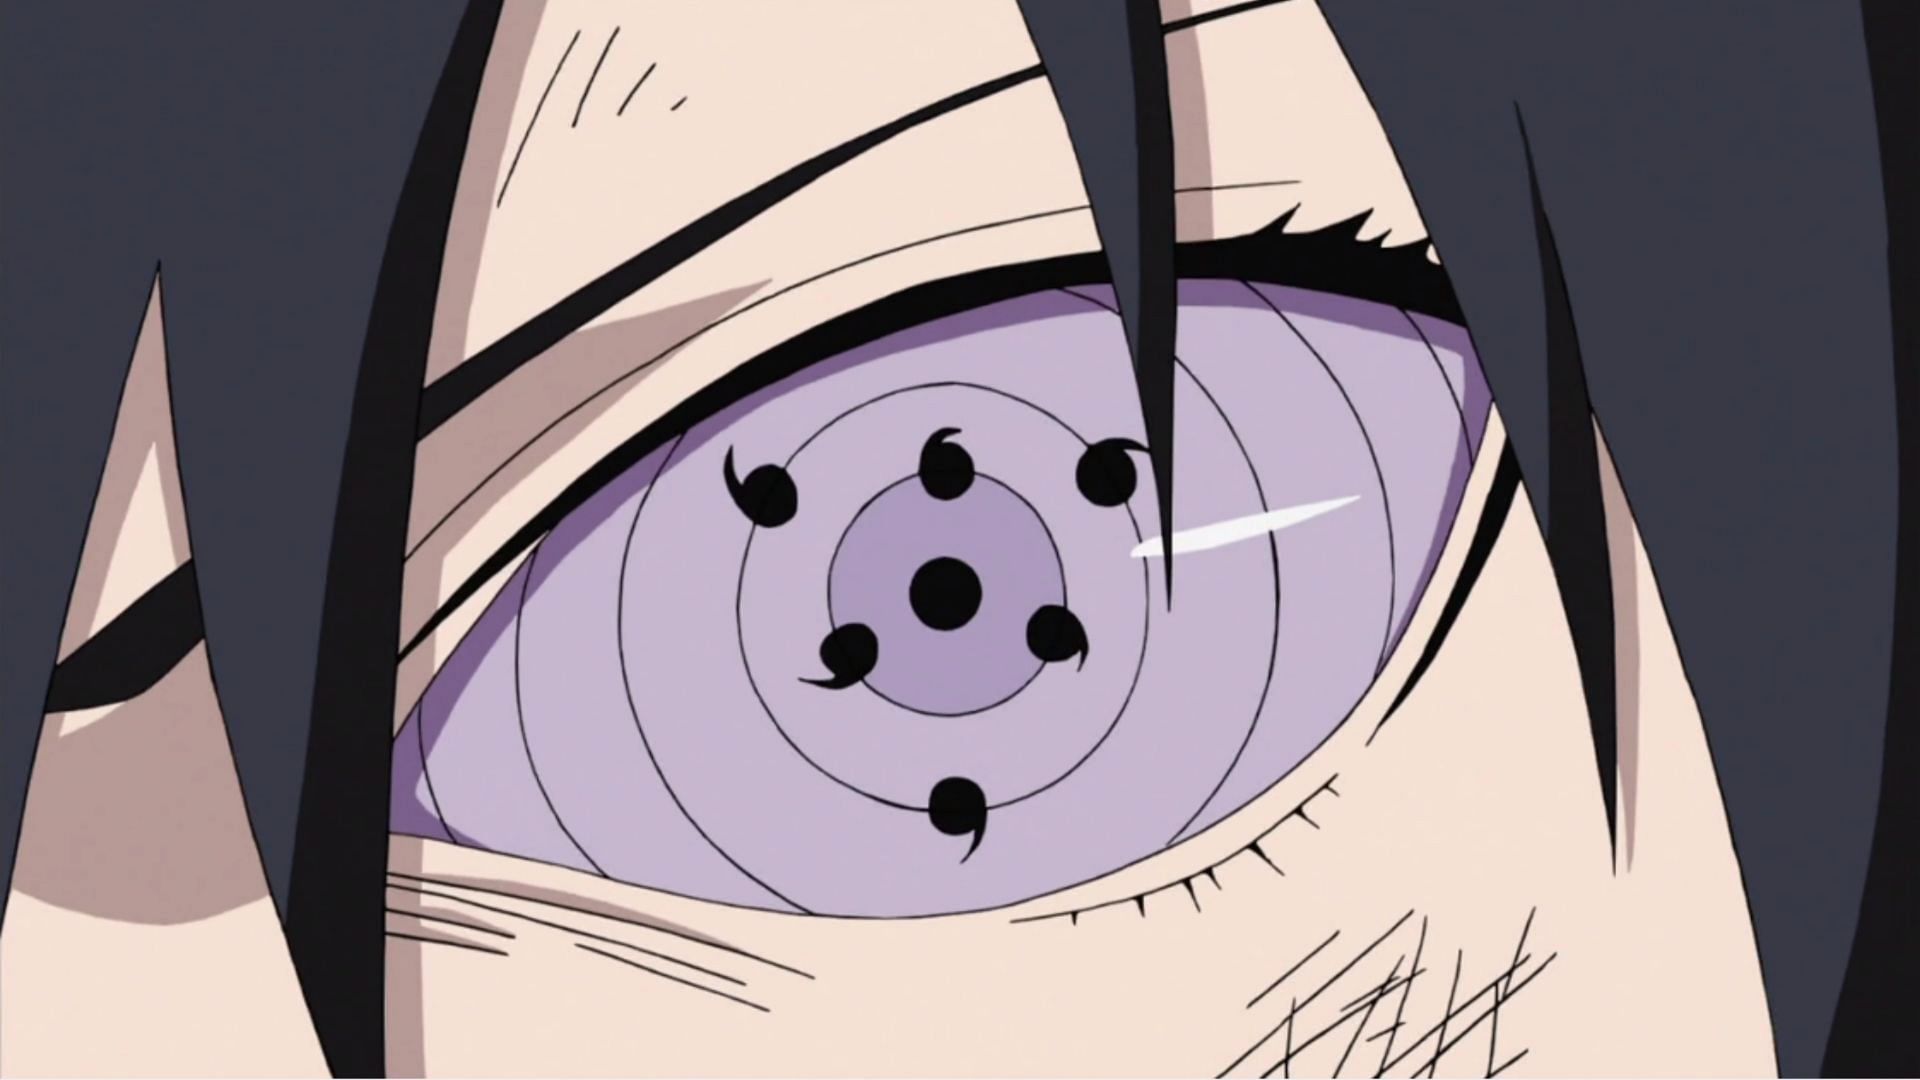 Every known Dojutsu in the Naruto Universe ranked from weakest to